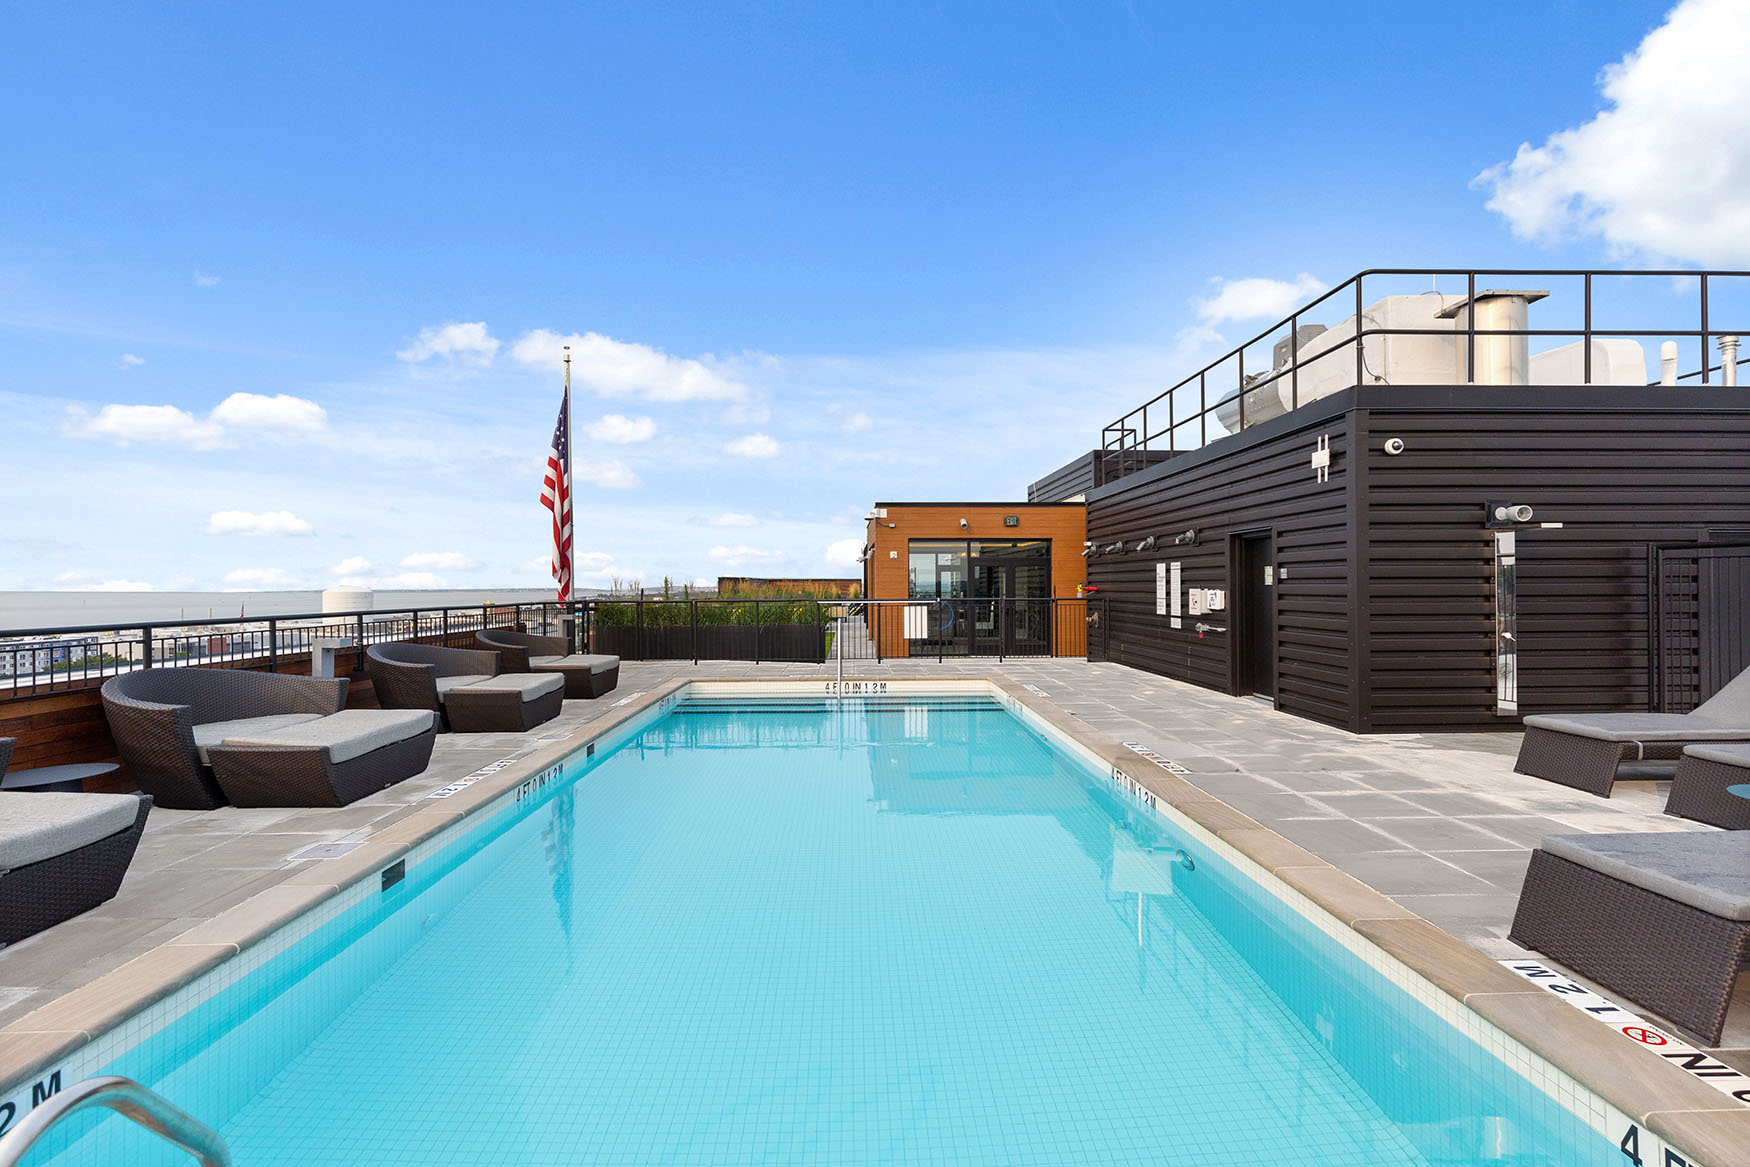 View of rooftop pool with lounge chairs and sky in background